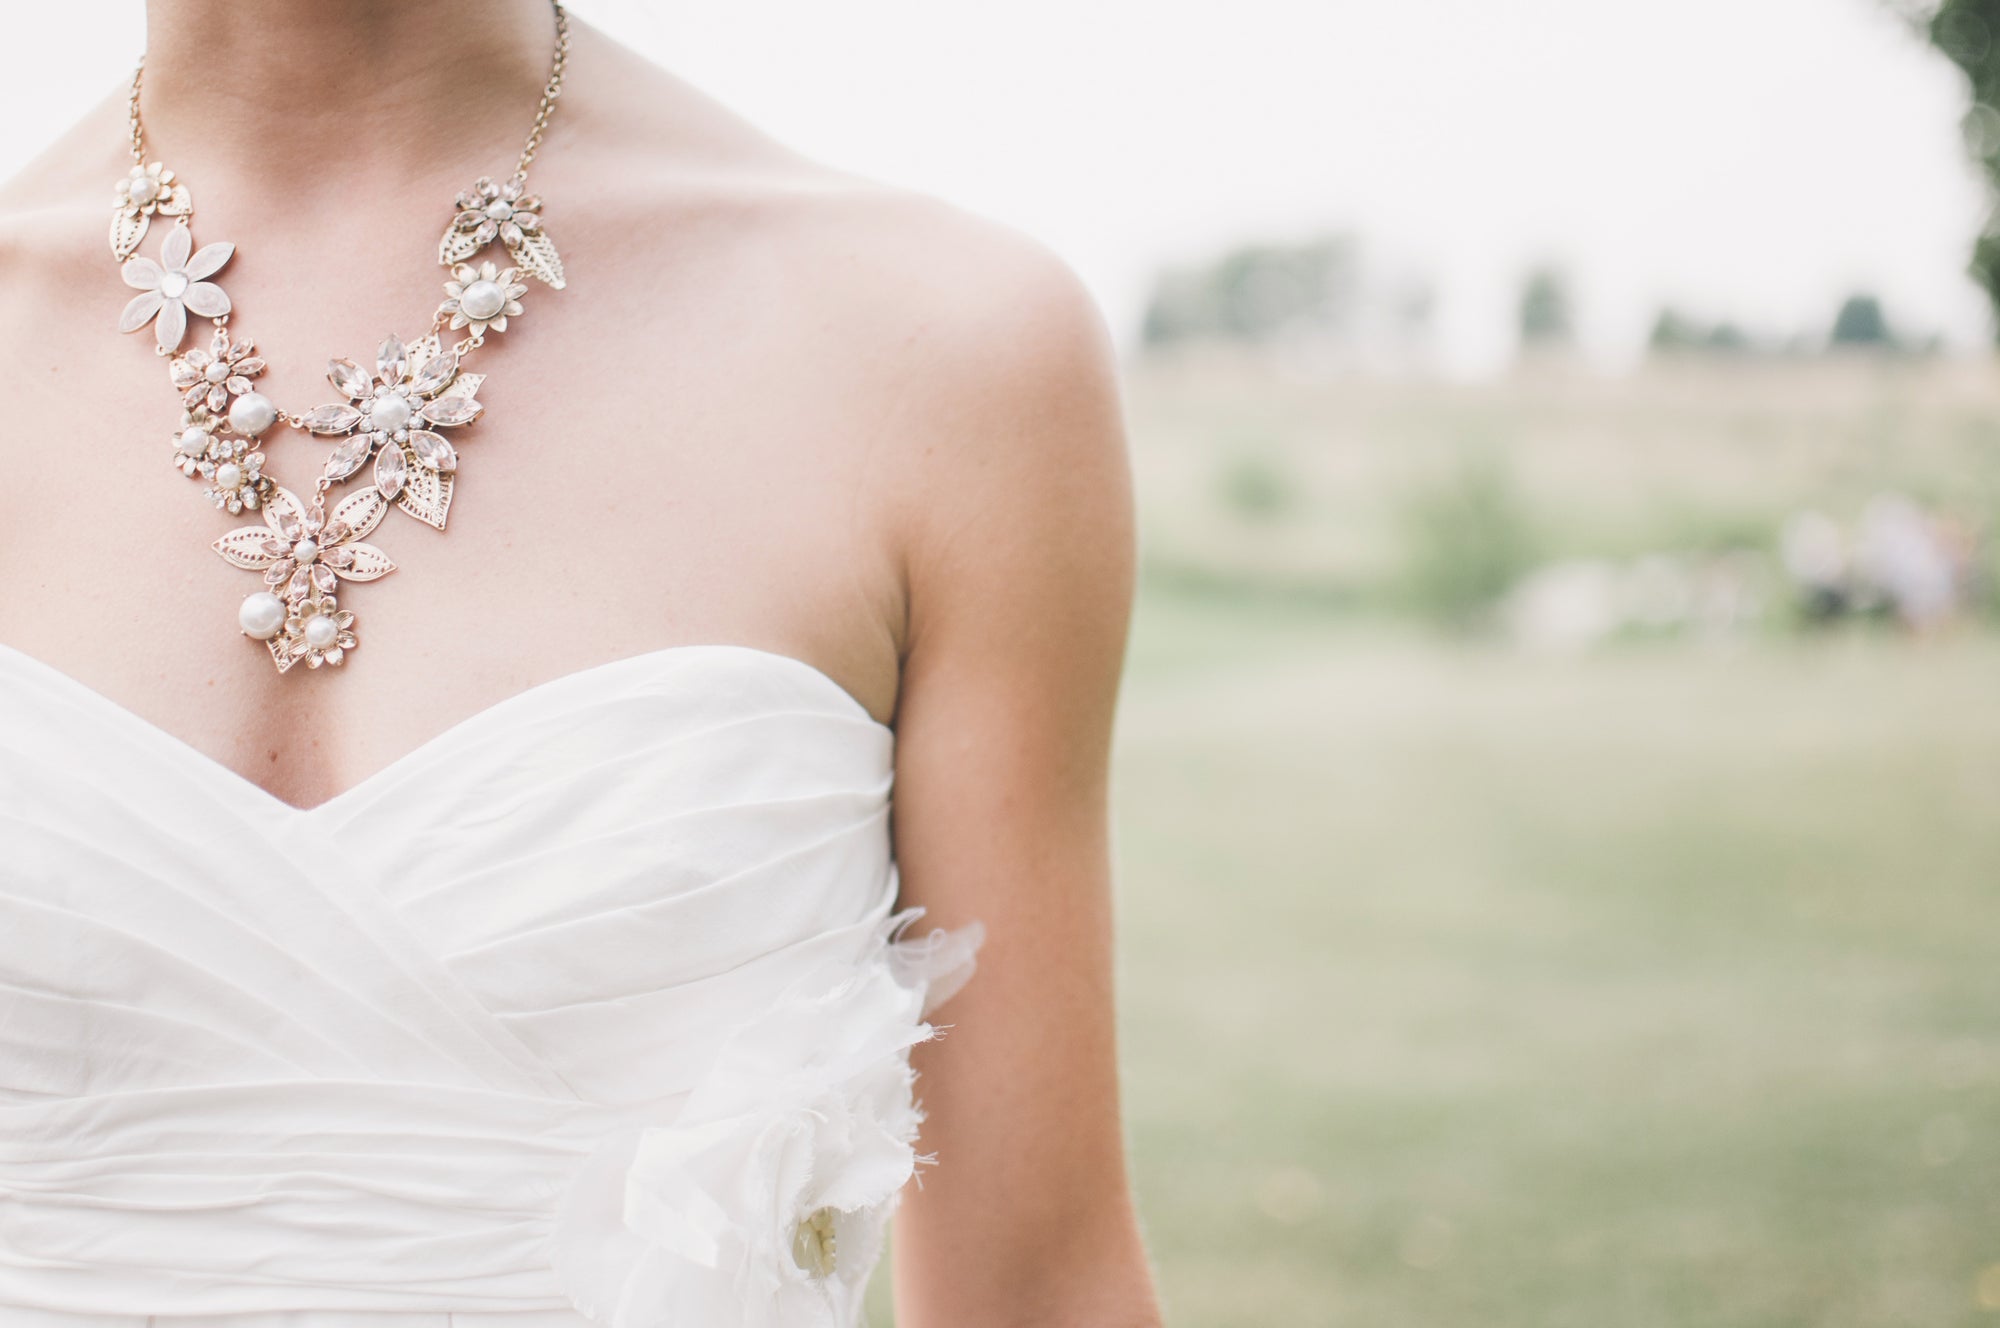 wedding day packing list for brides, what to pack on your wedding day, wedding day essentials